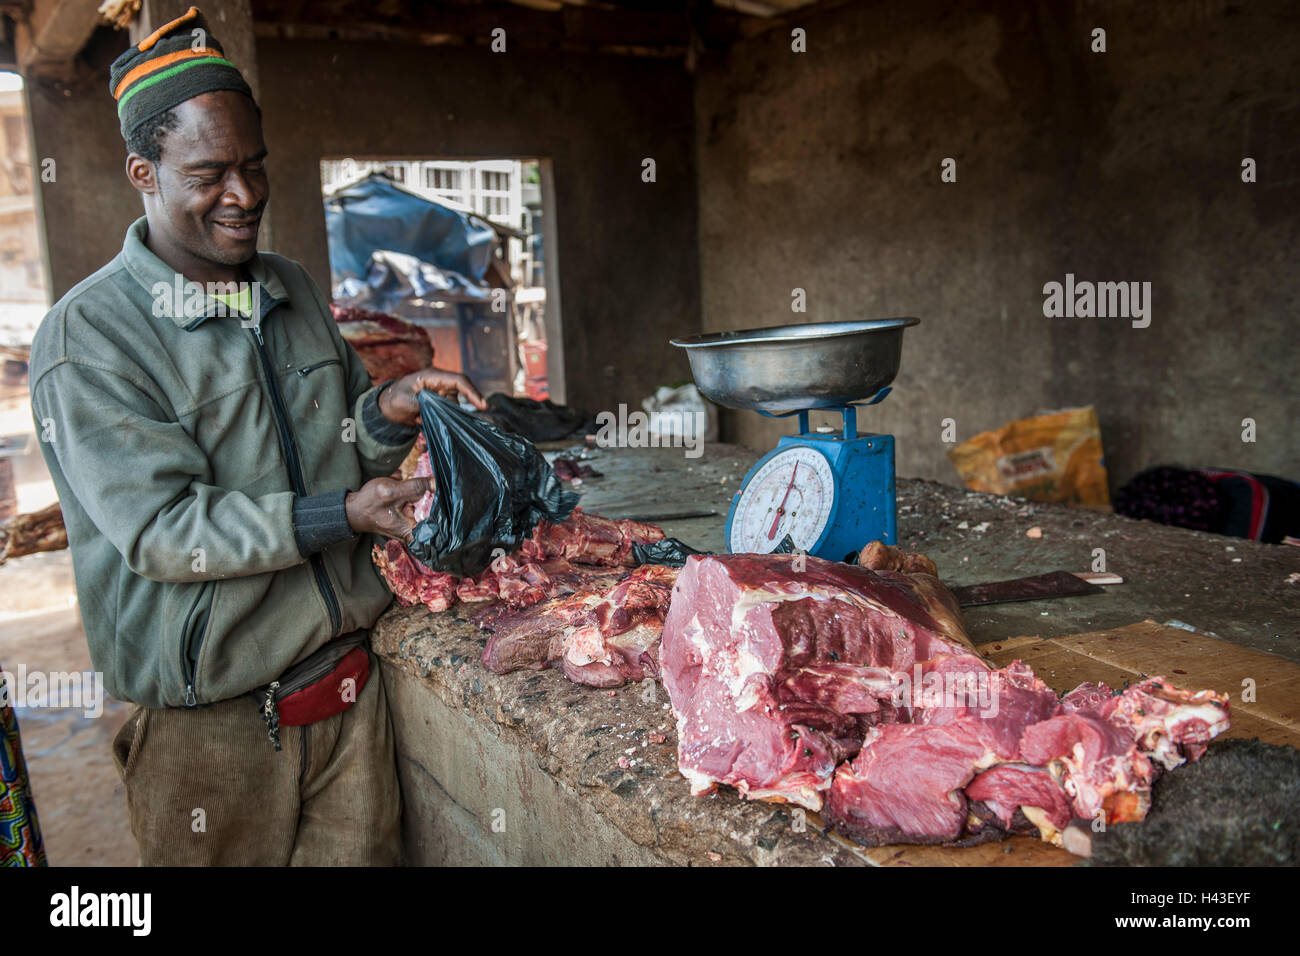 Butcher with meat at market, street scene, Bamenda, North-West Region, Cameroon Stock Photo